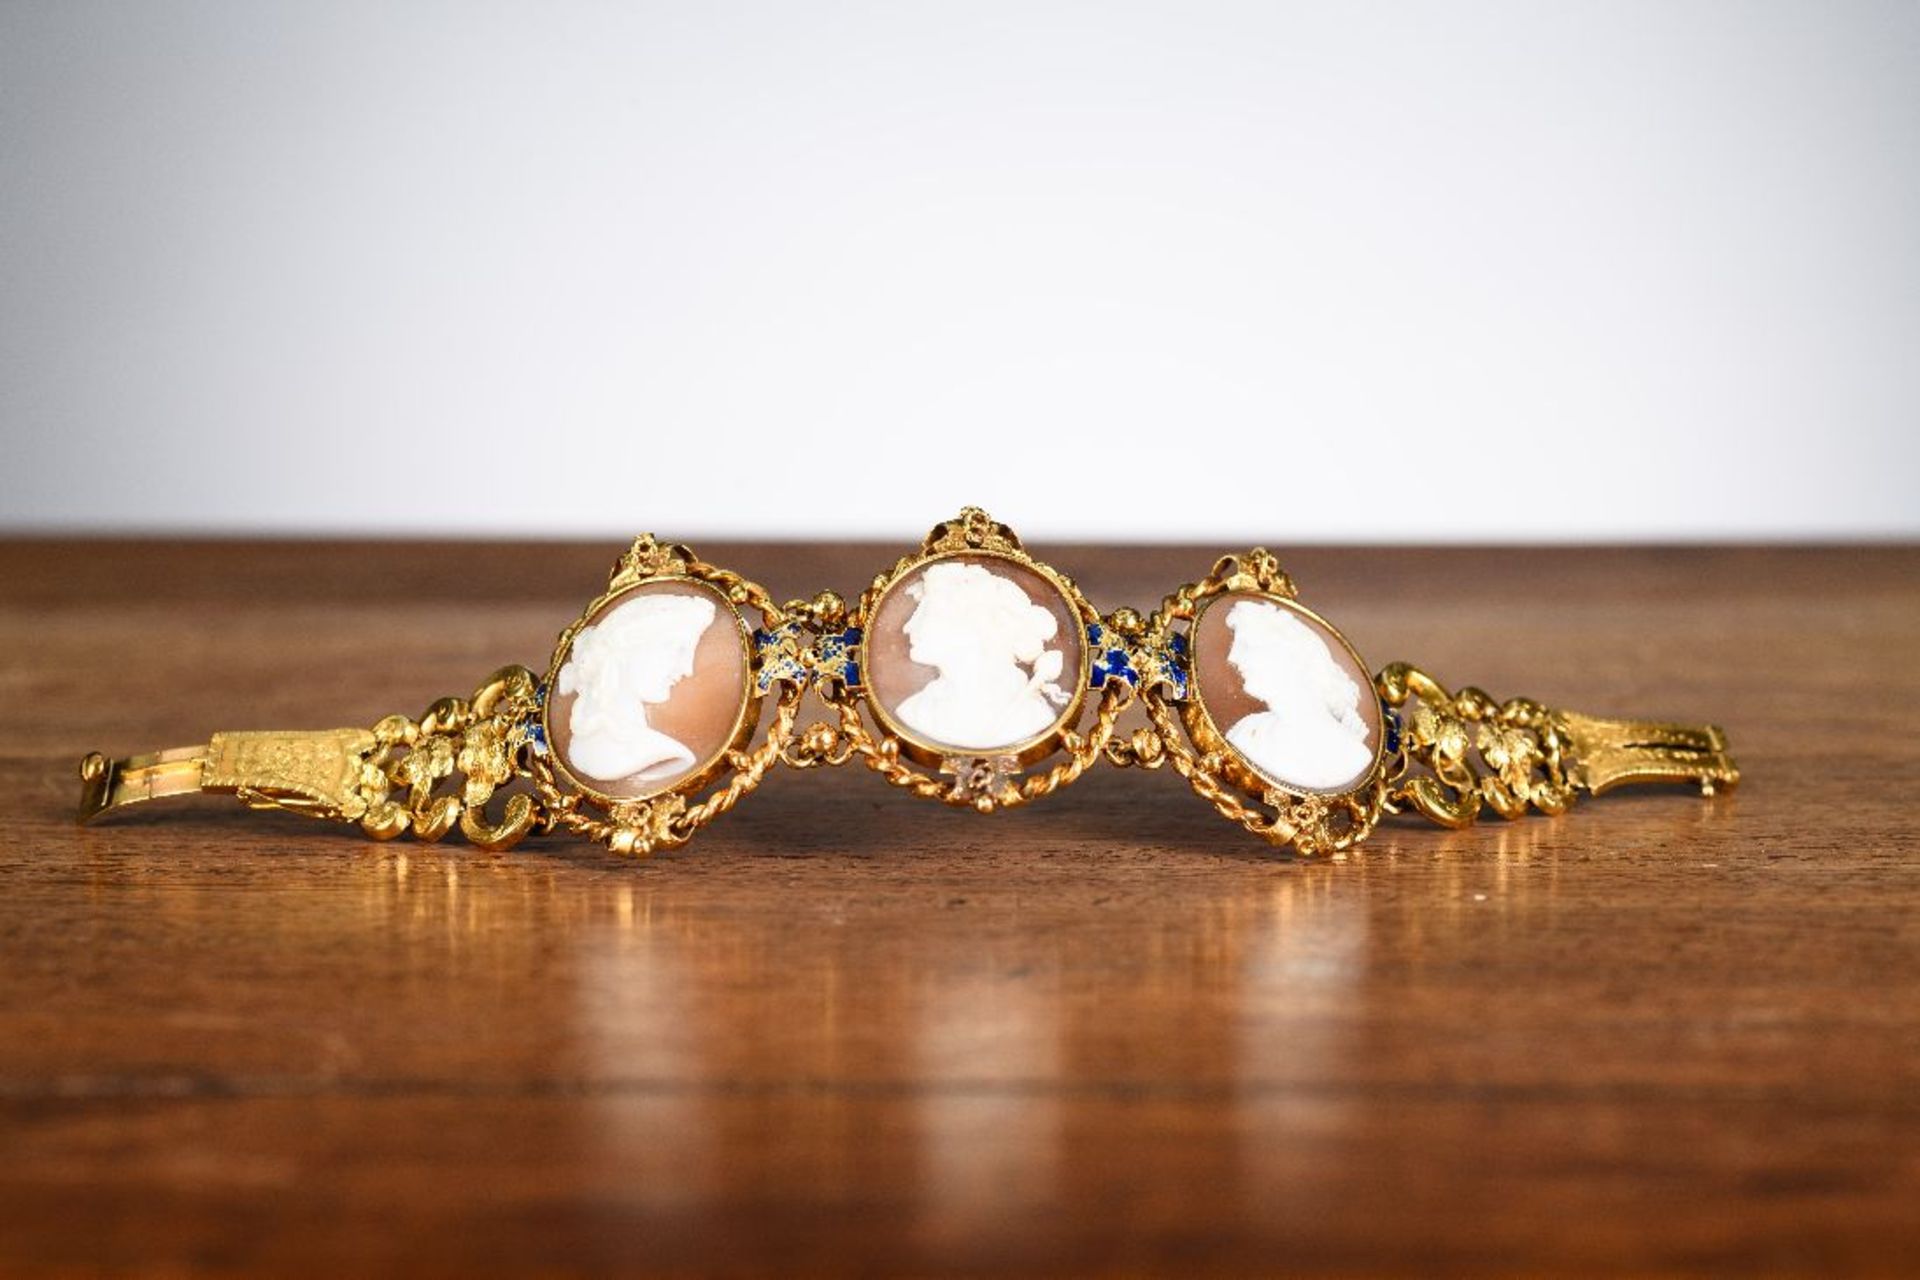 Louis-Philippe gold bracelet with three cameos